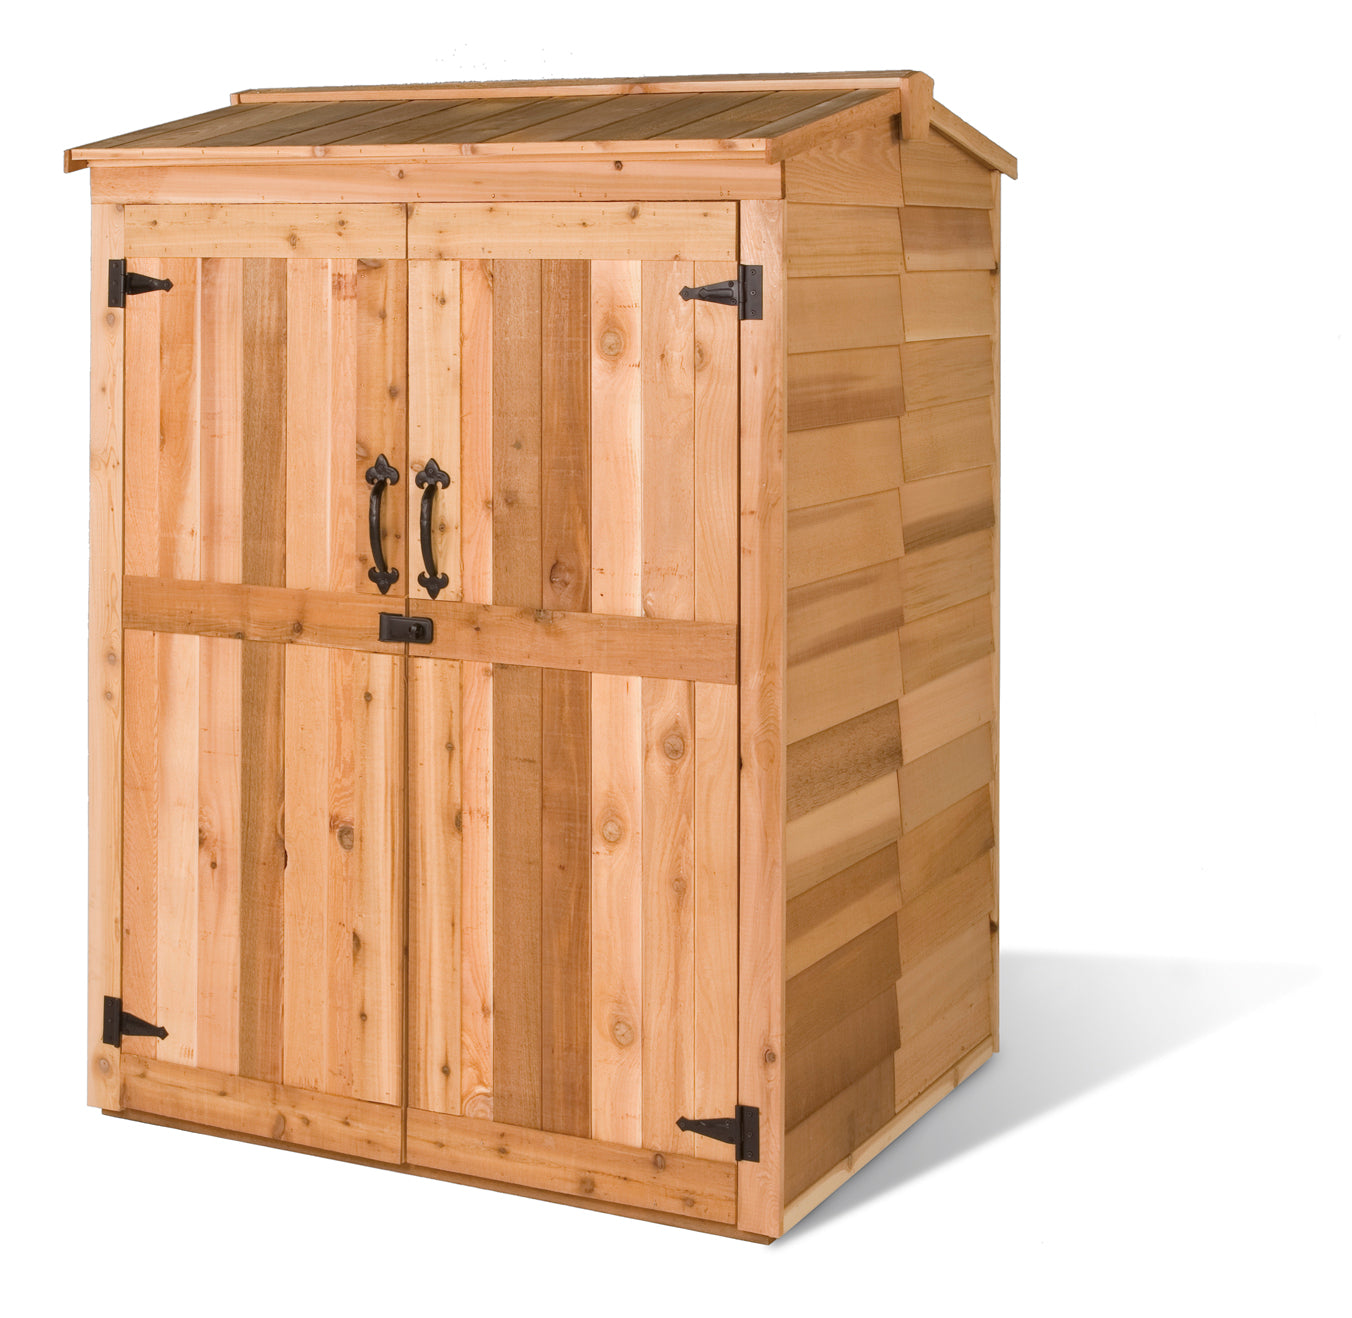 Green Pod - DIY Wooden Garbage Can & Recycling Bin Shed Kits